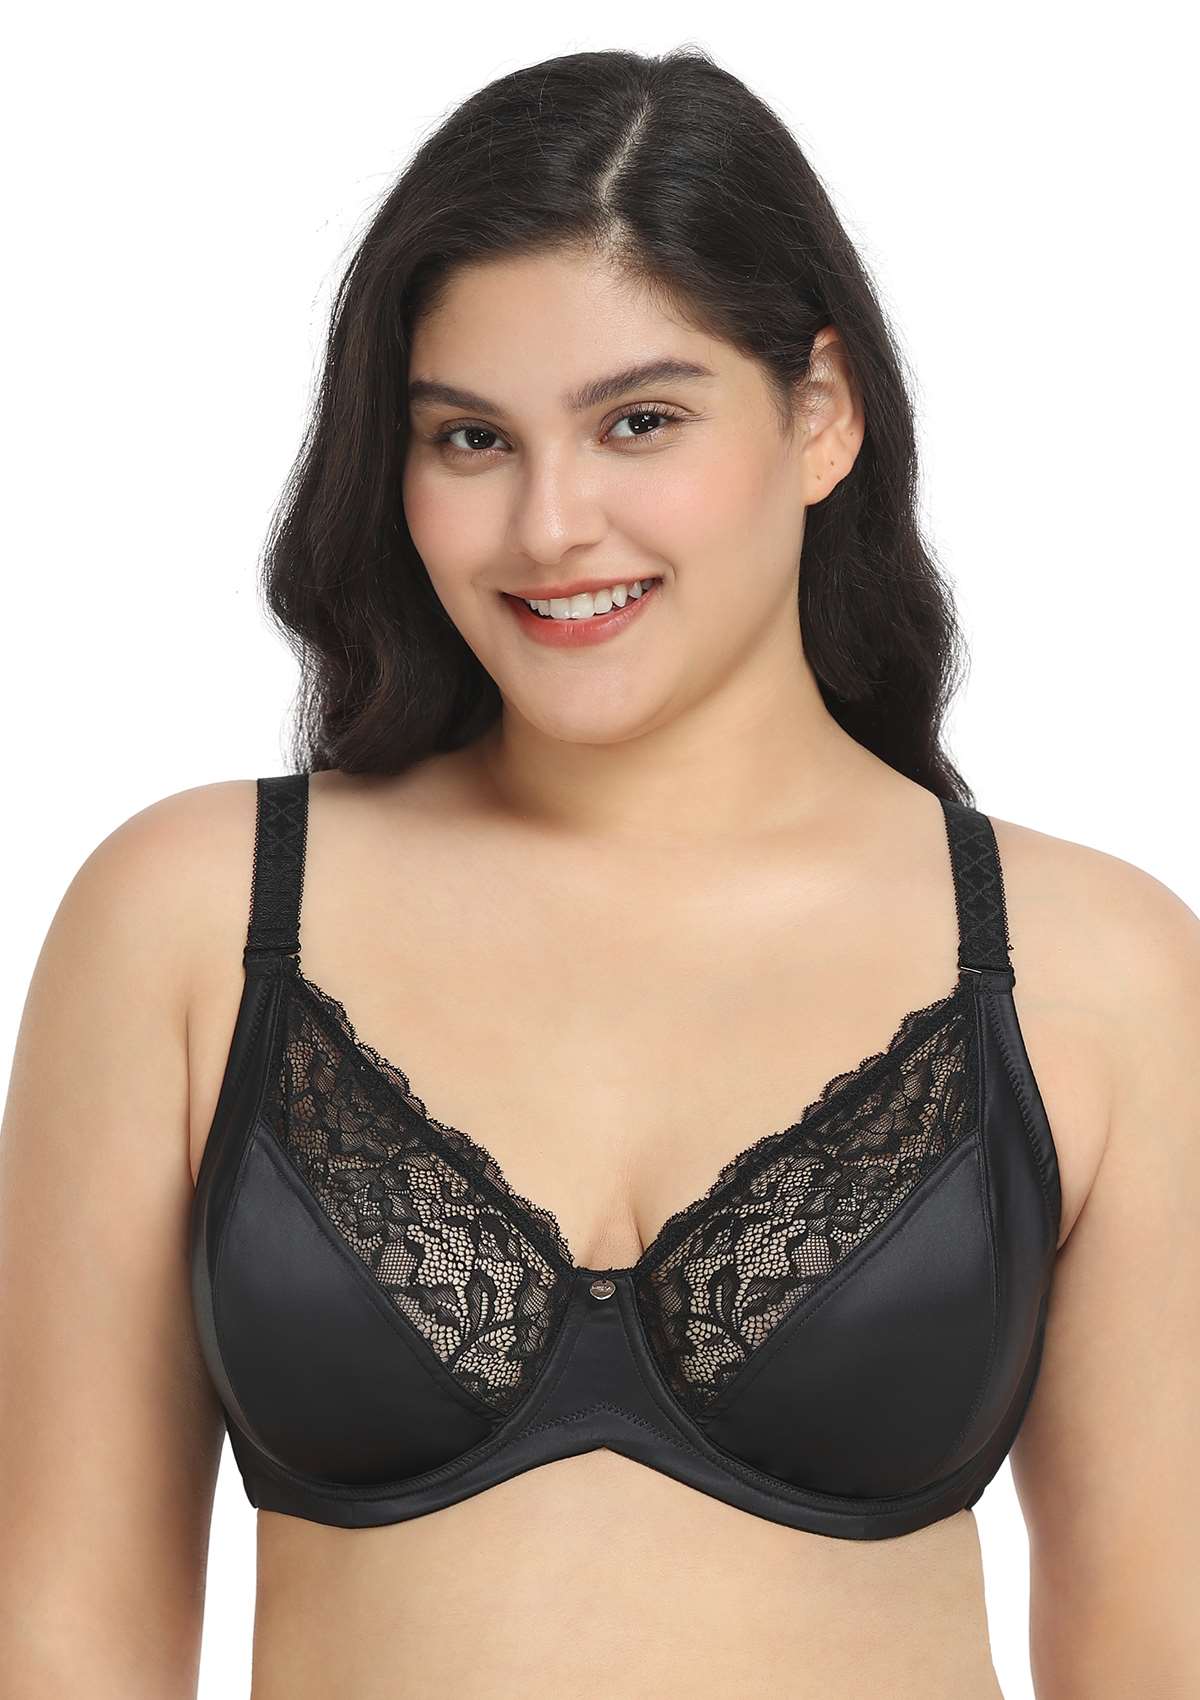 HSIA Foxy Satin Silky Full Coverage Underwire Bra With Floral Lace Trim - Black / 40 / C